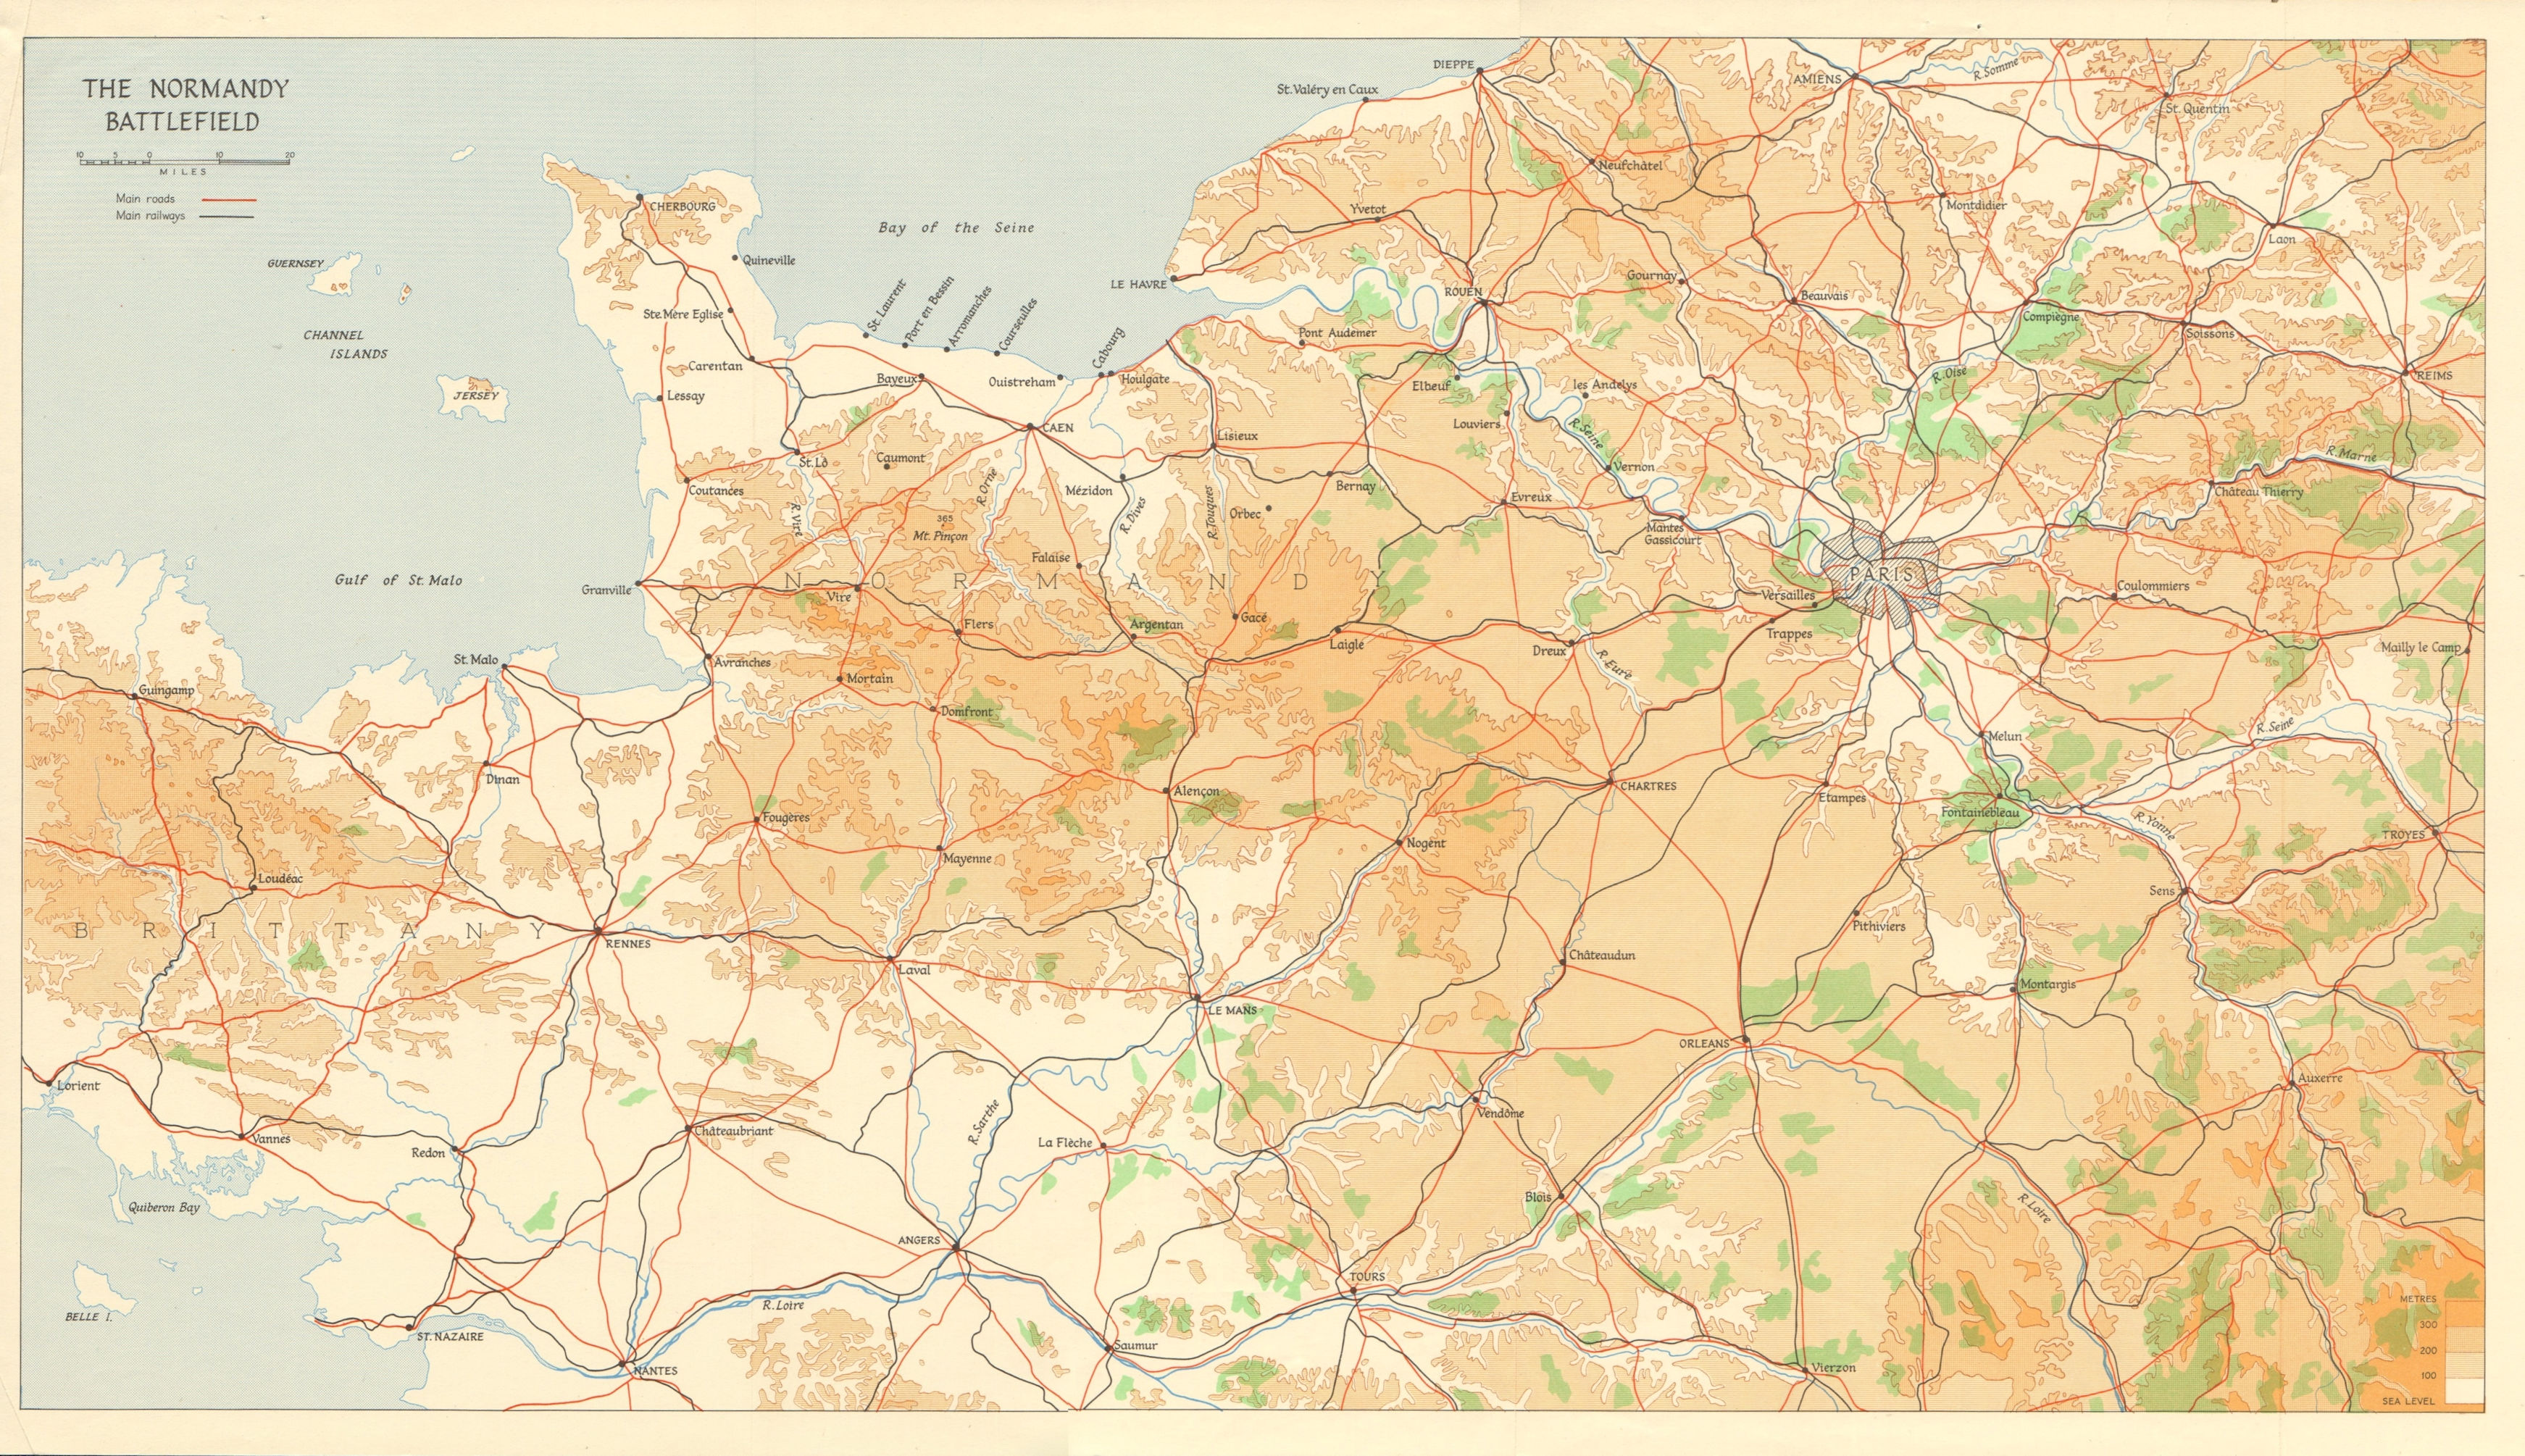 The Normandy Battlefield. Operation Overlord / Neptune. D-Day 1944 1962 map